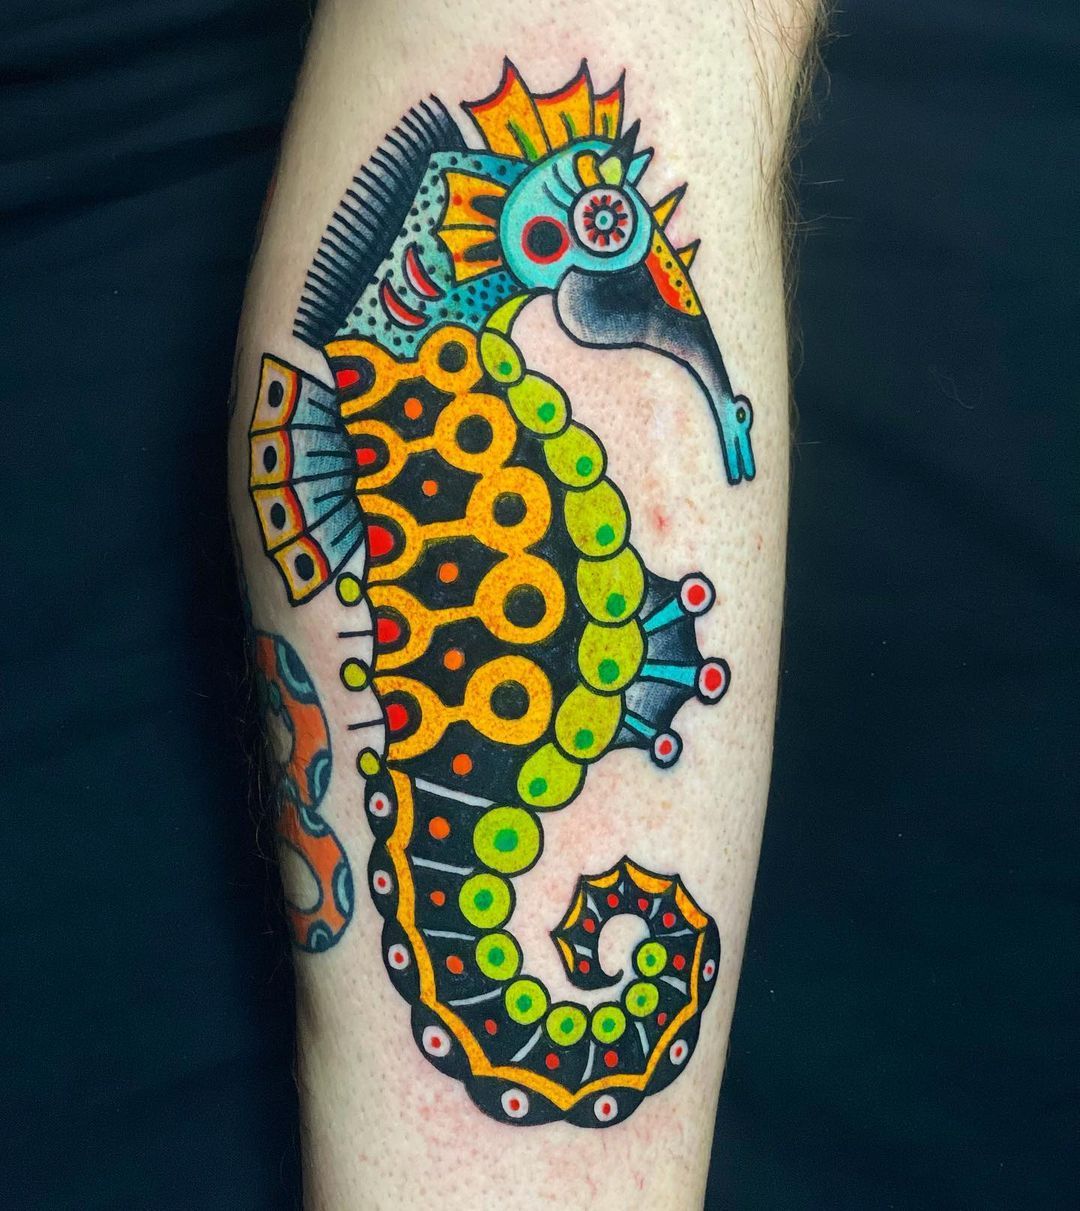 101 Best Seahorse Tattoo Ideas You Have To See To Believe!